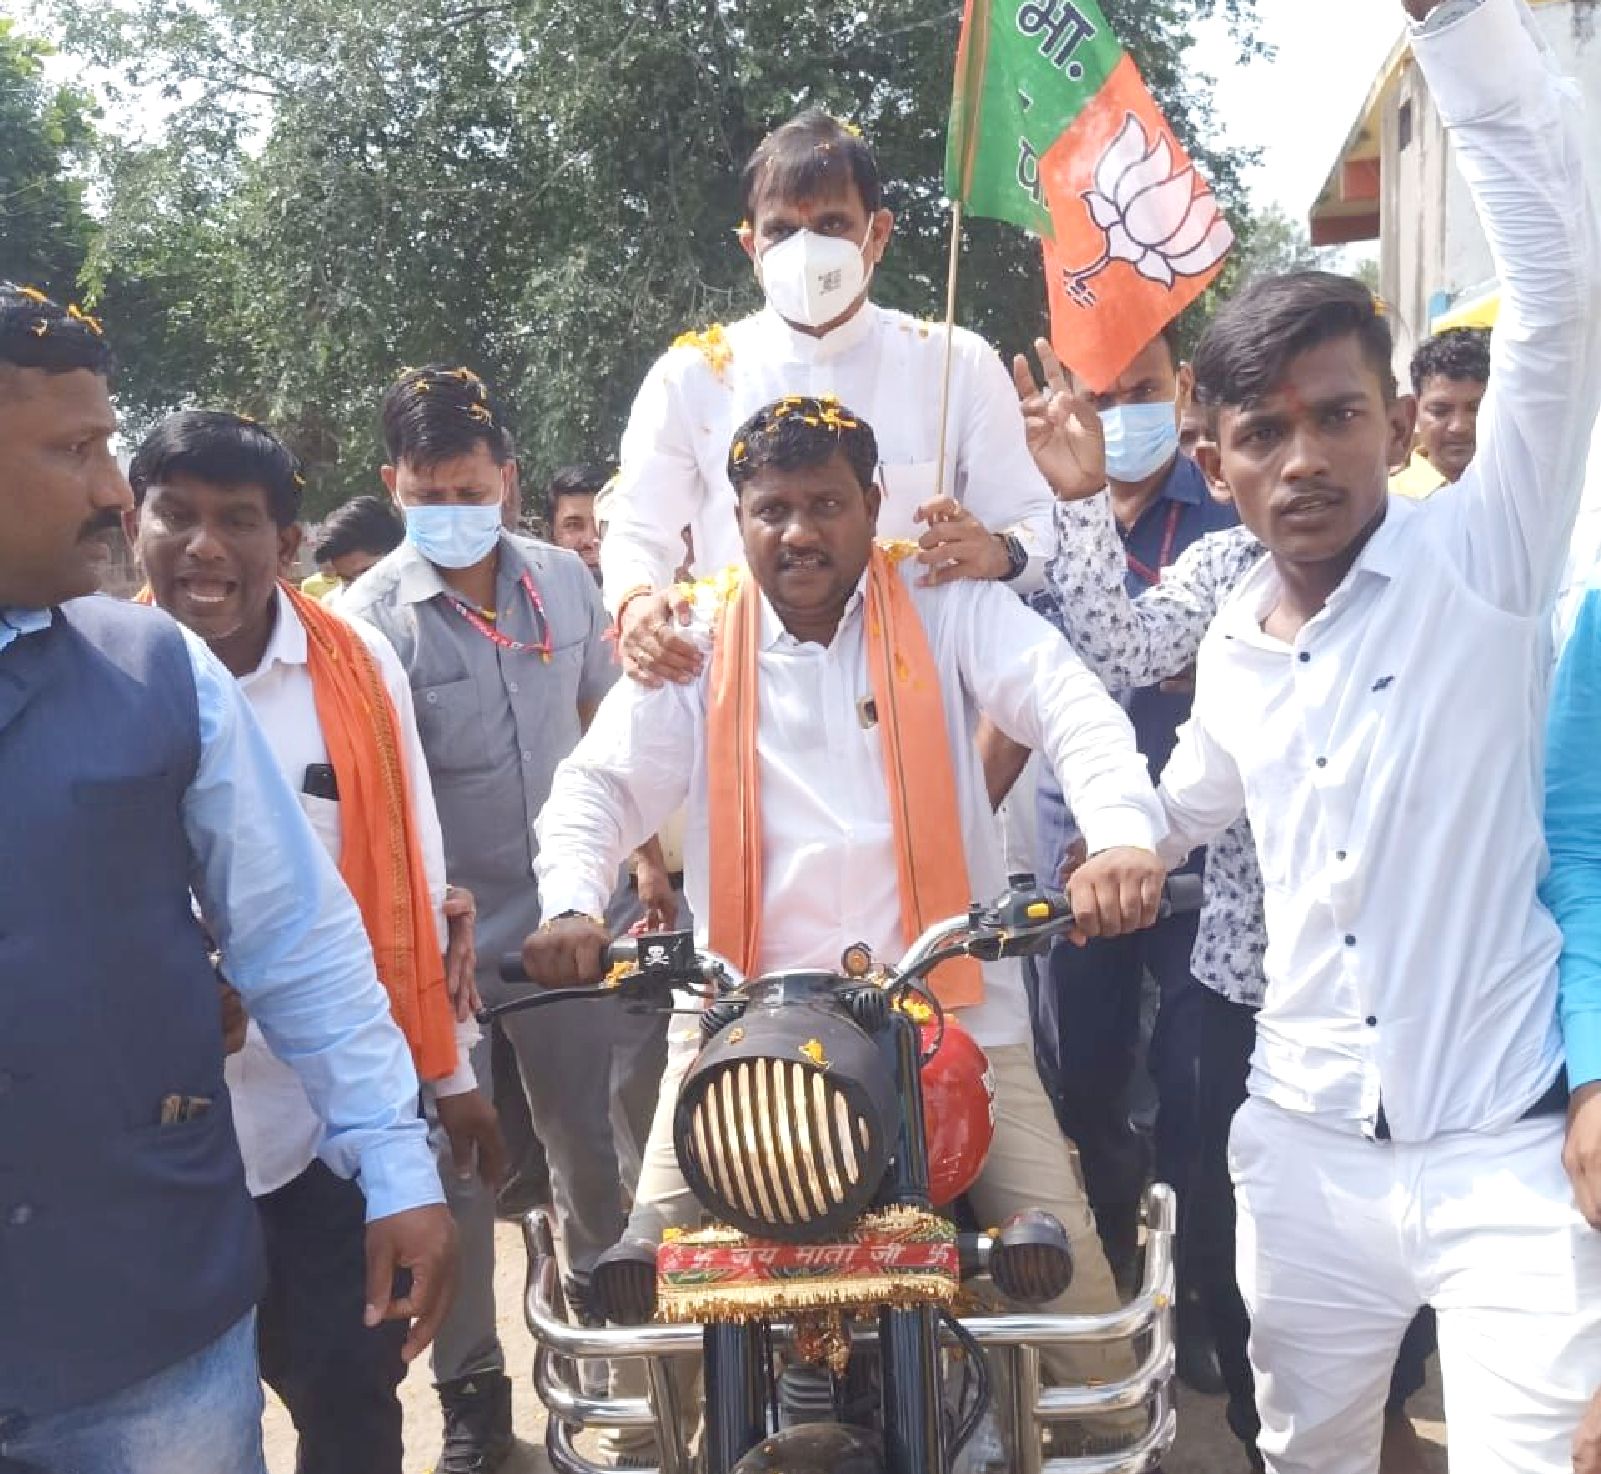  State President, Minister and MLA came out on bike